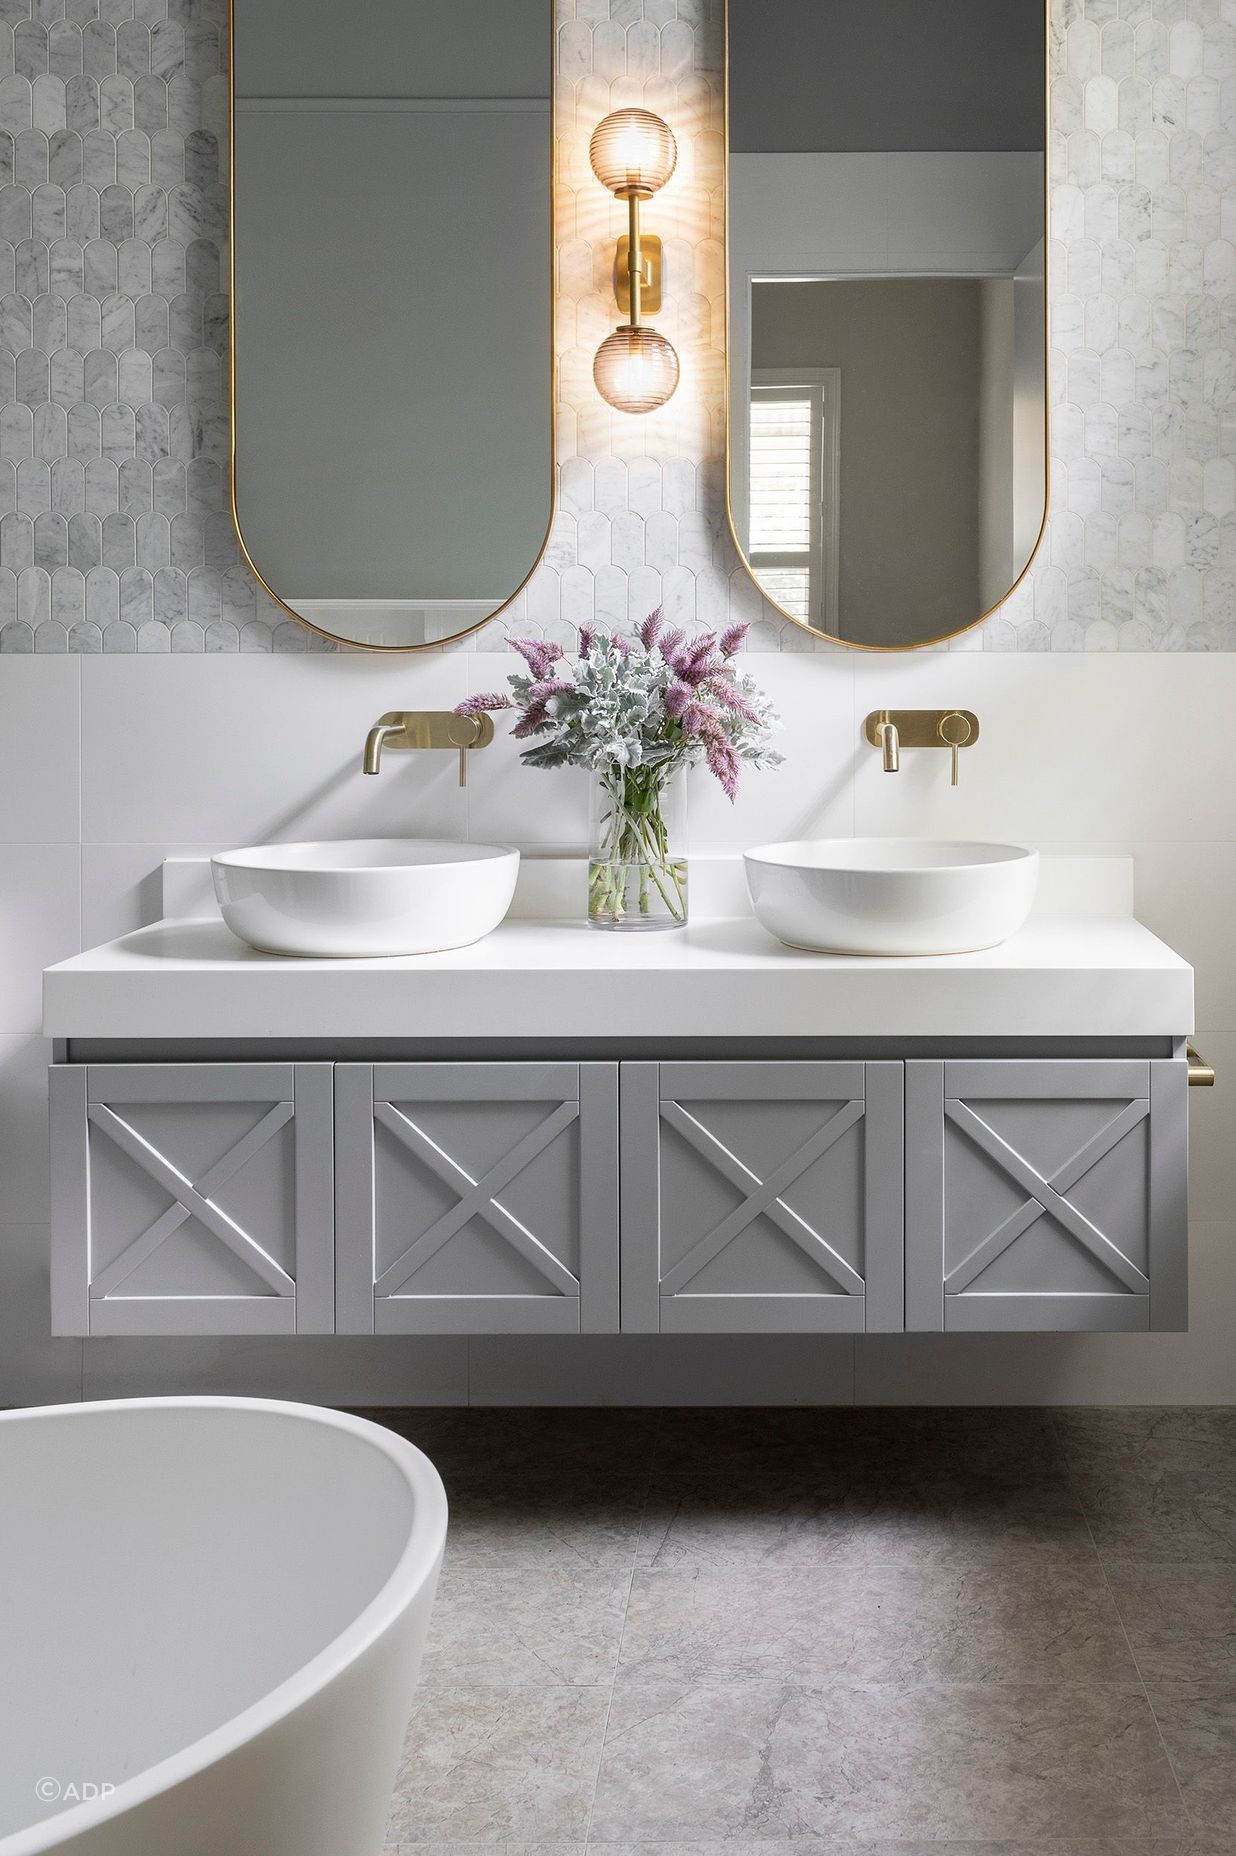 Replacing and installing a new bathroom vanity, such as the popular Charleston Vanity, is often part of a total bathroom renovation project.